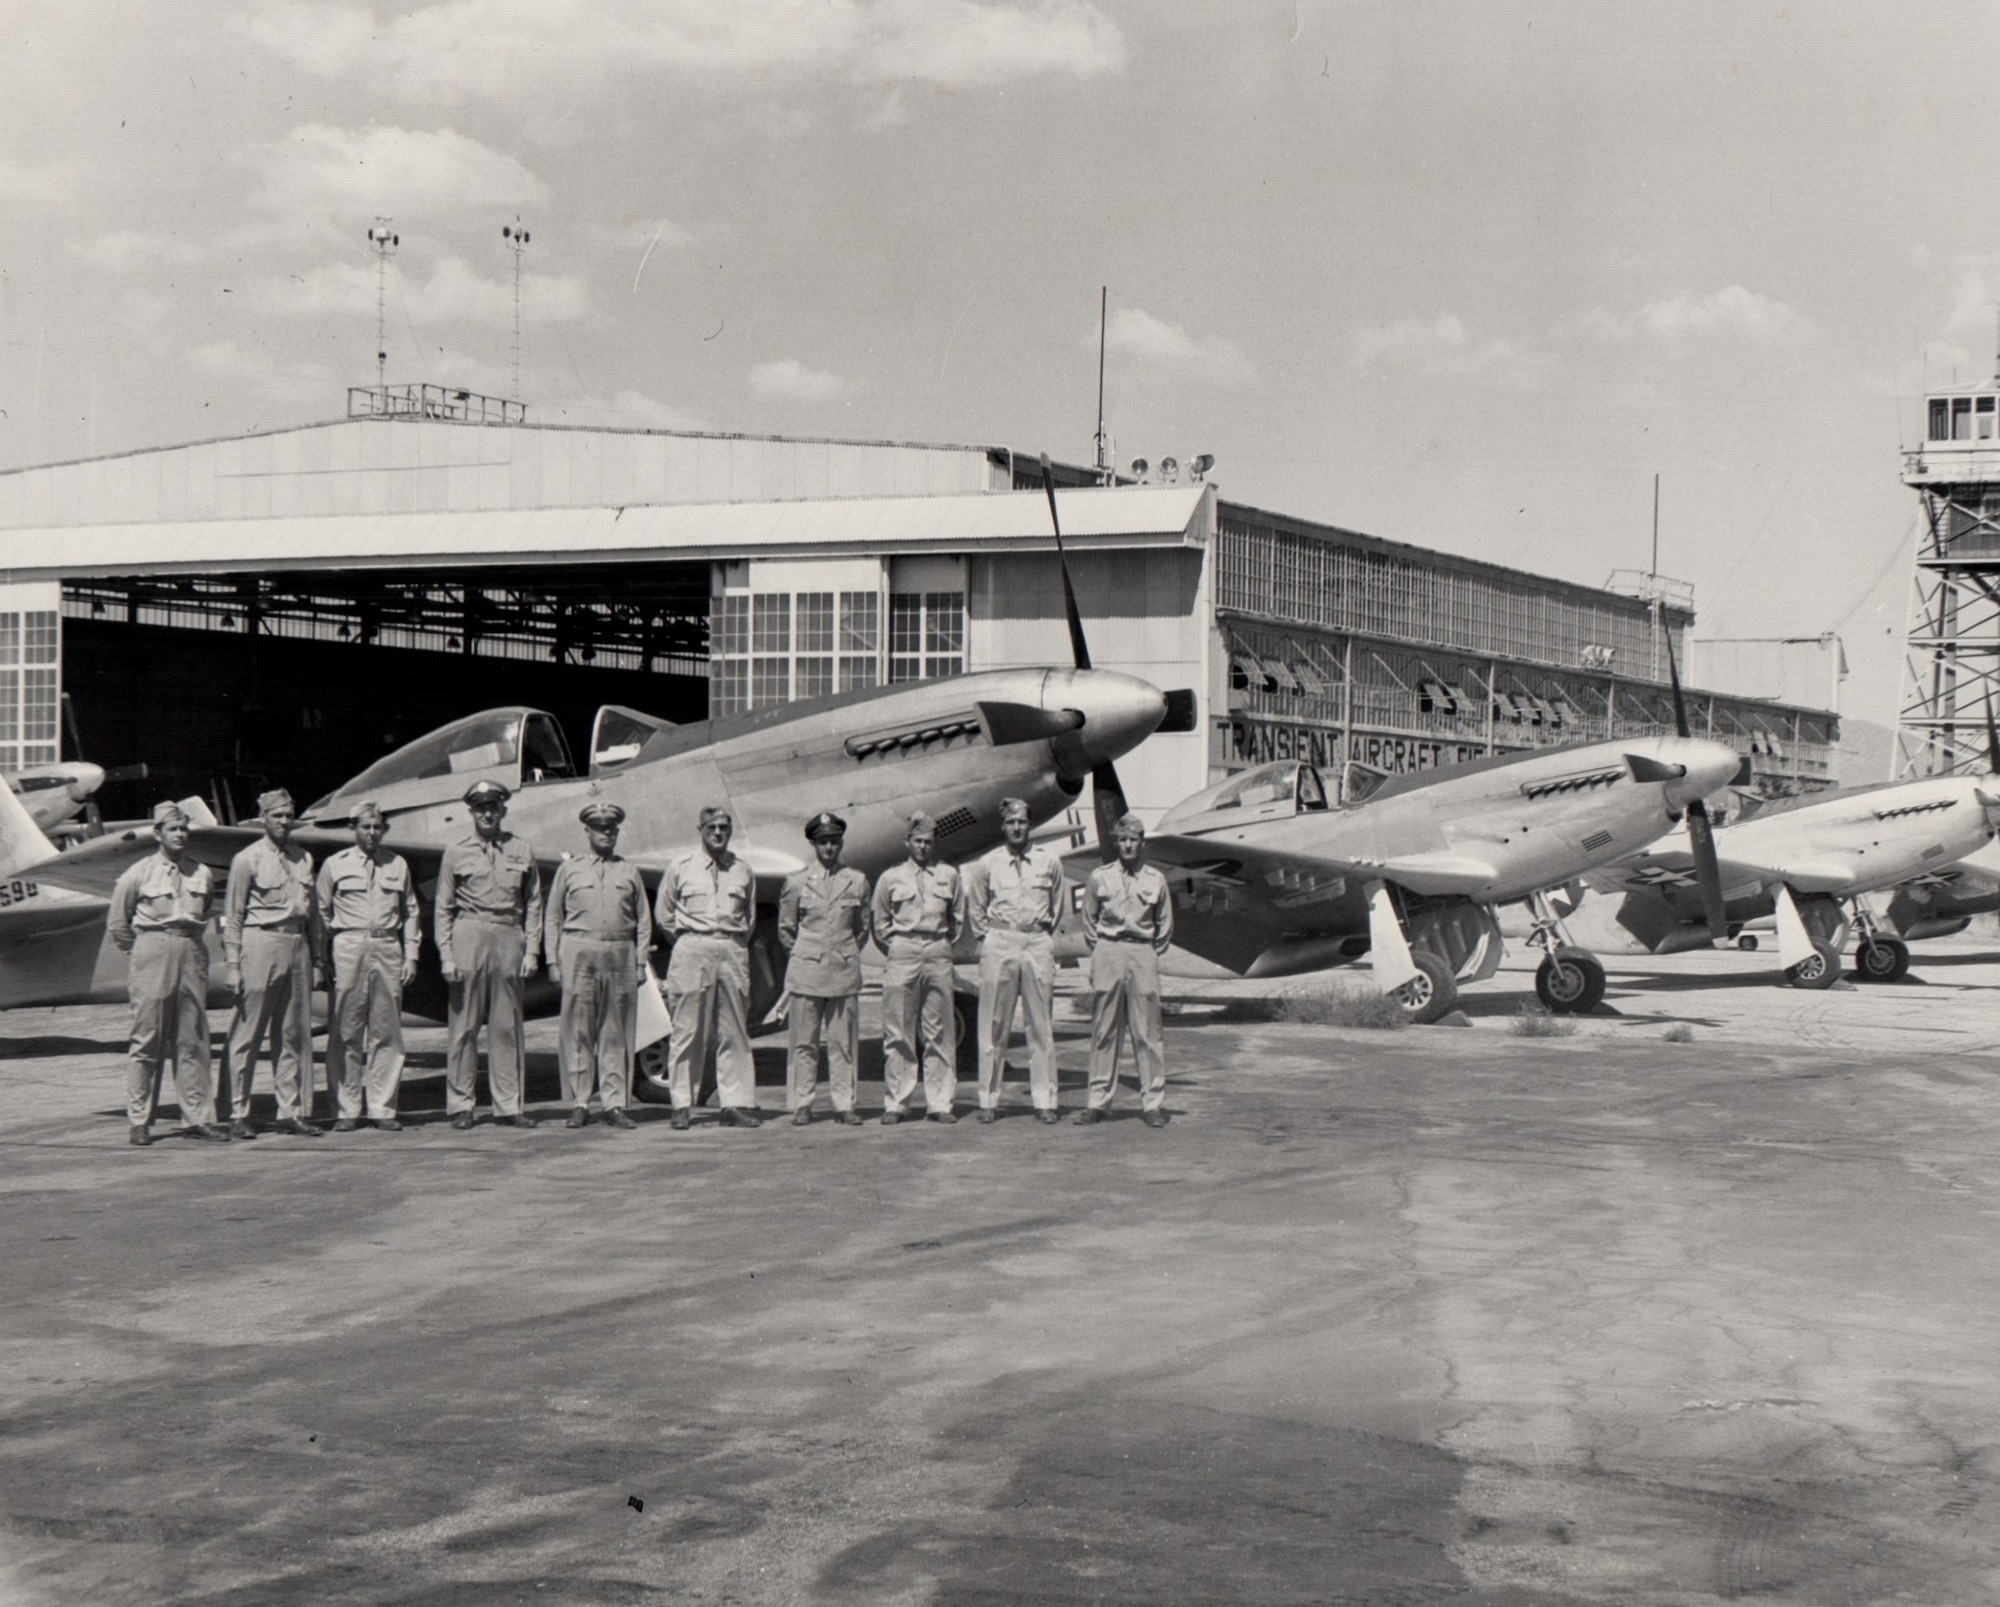 10 Airmen stand next to each other on a flight line in front of three planes and a hangar